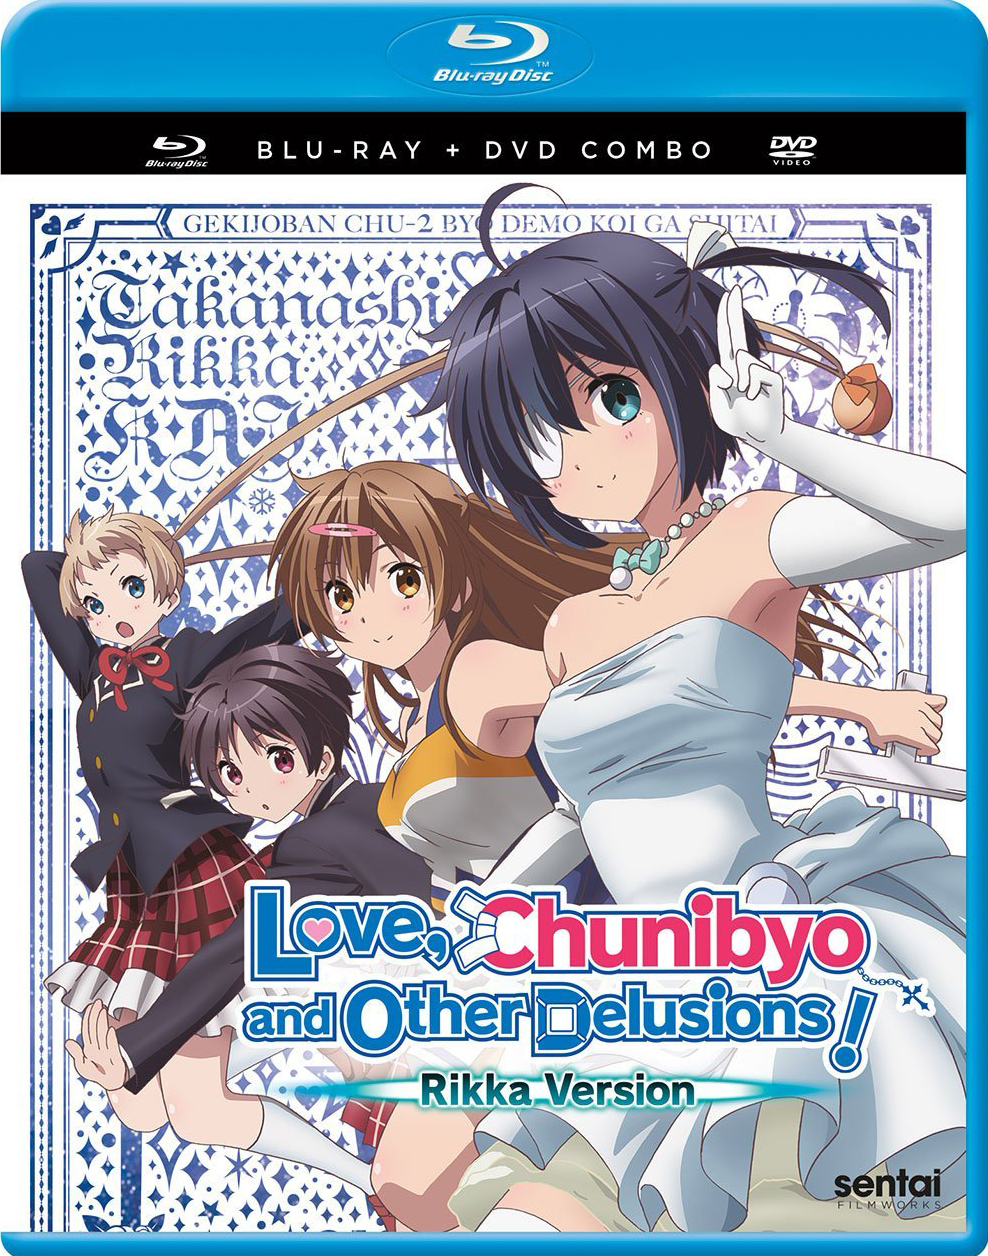 Love, Chunibyo & Other Delusions: Ultiate Collection [Blu-ray] - Best Buy